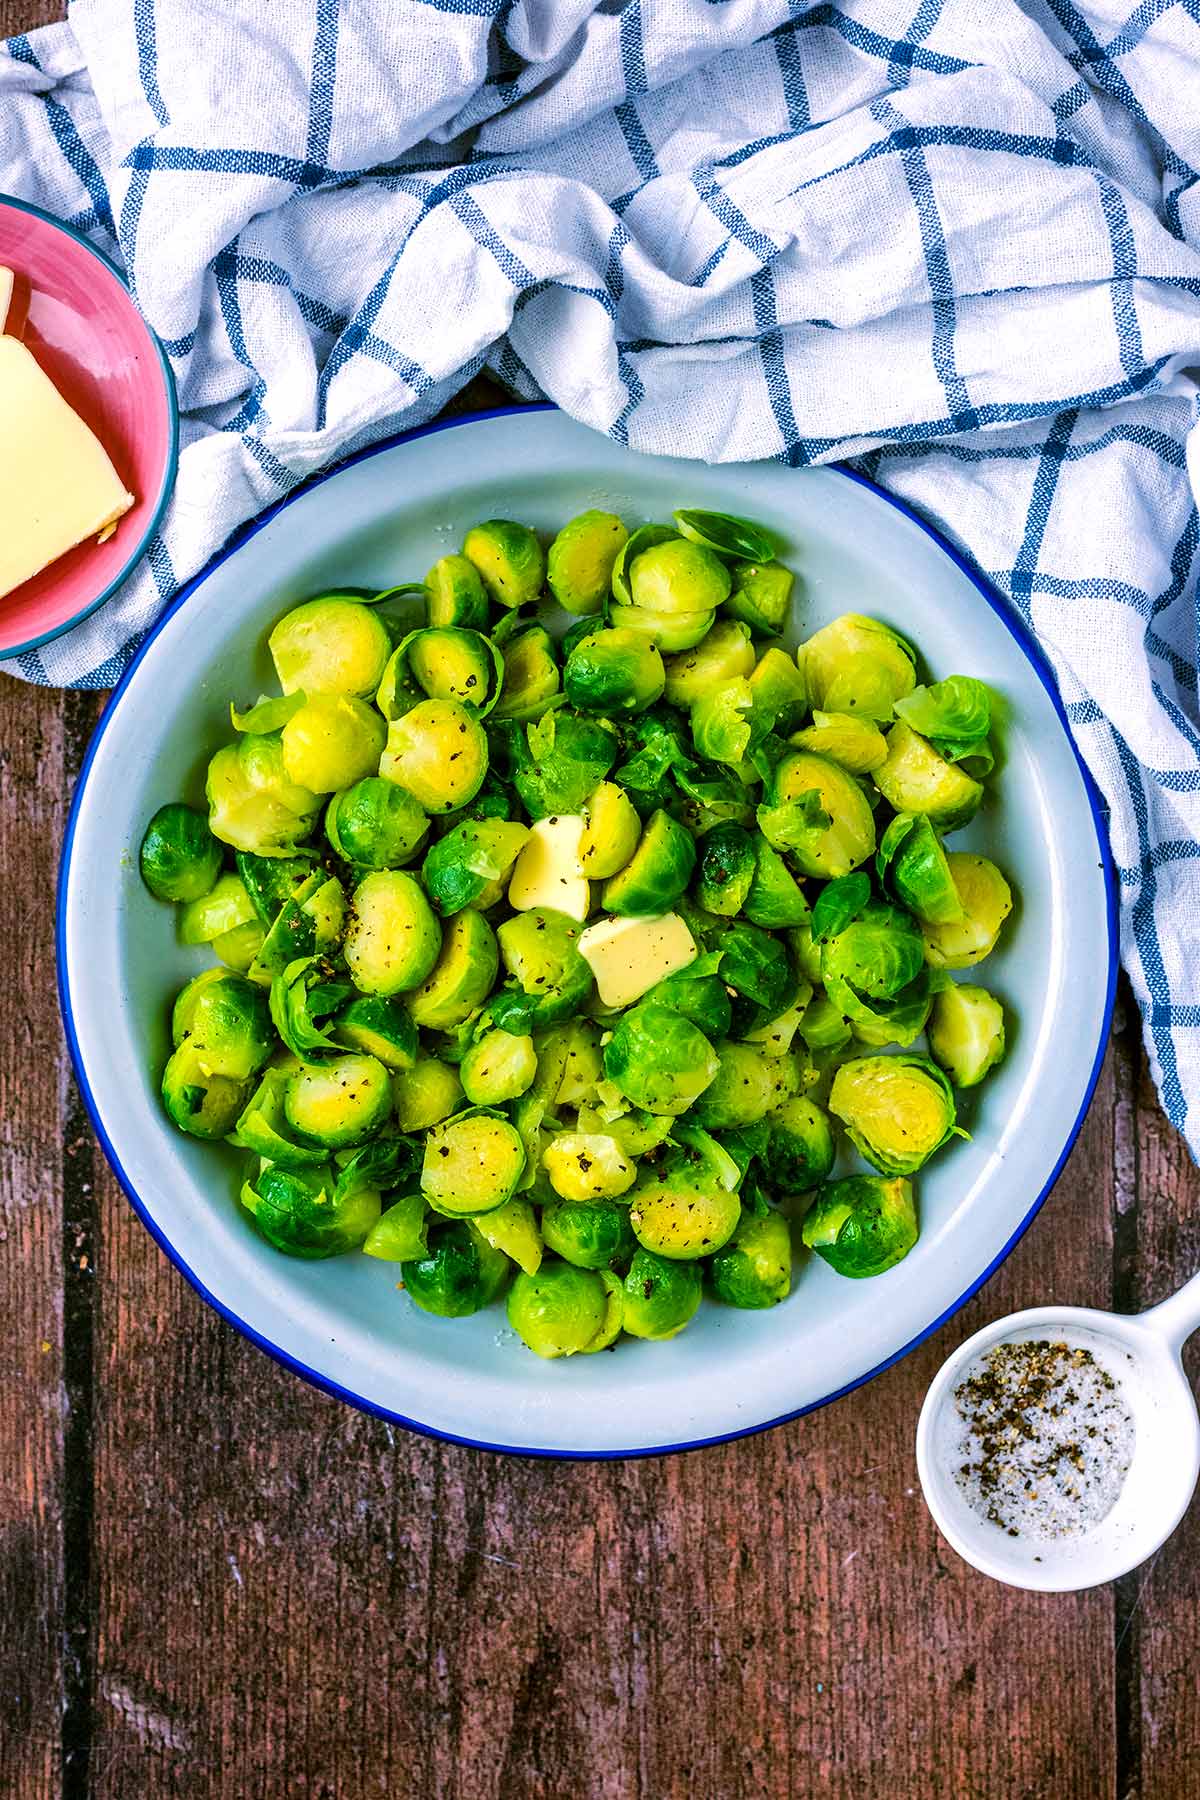 A bowl of cooked Brussels sprouts next to a checked towel.